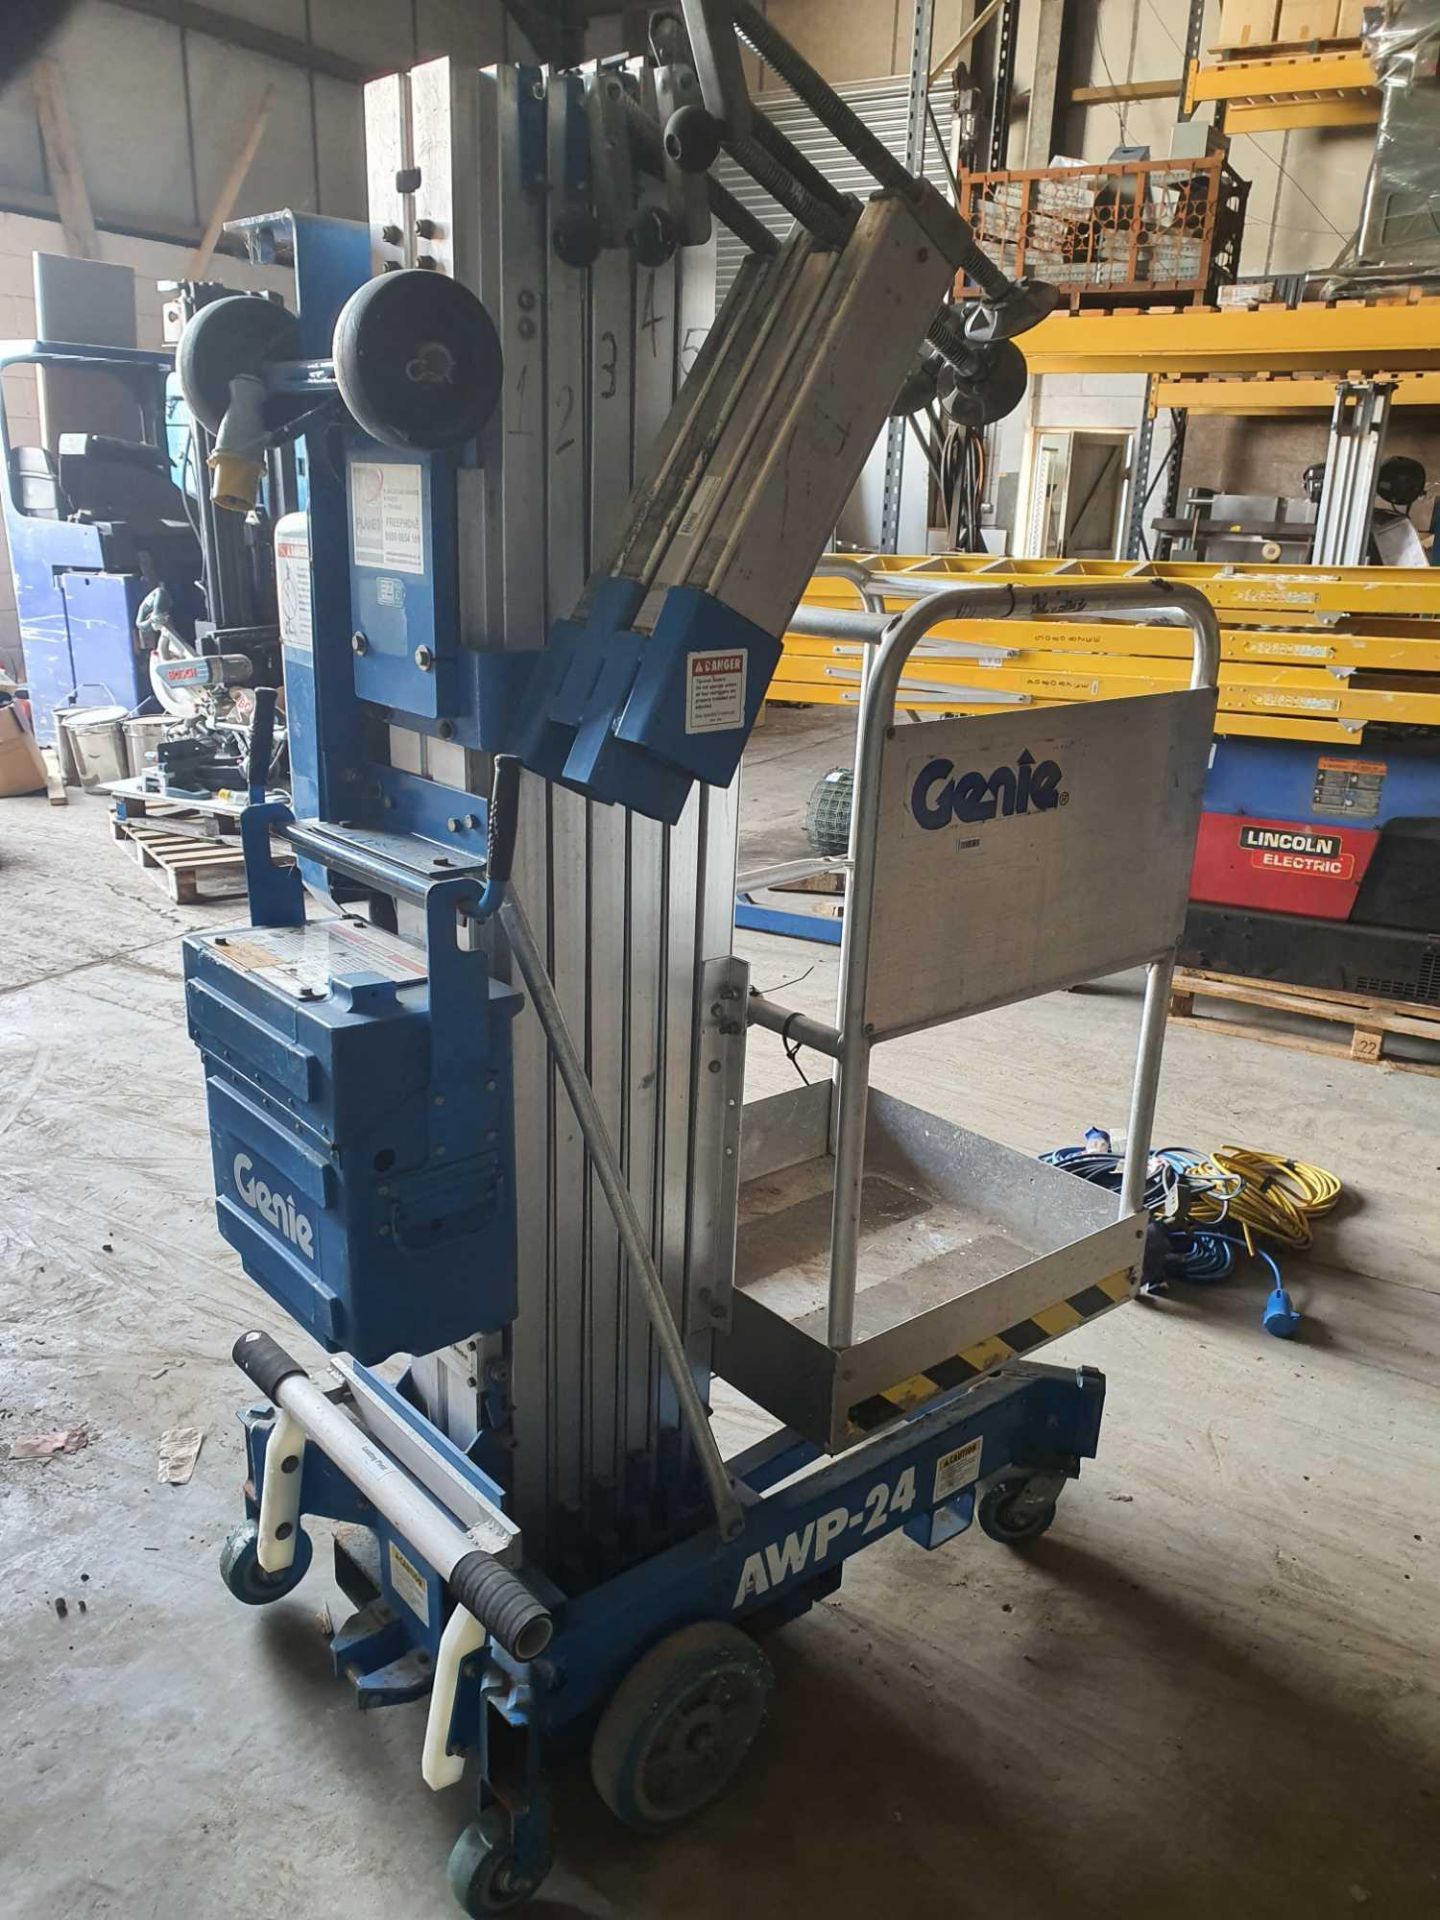 Genie awp 24 electric lift - Image 3 of 4